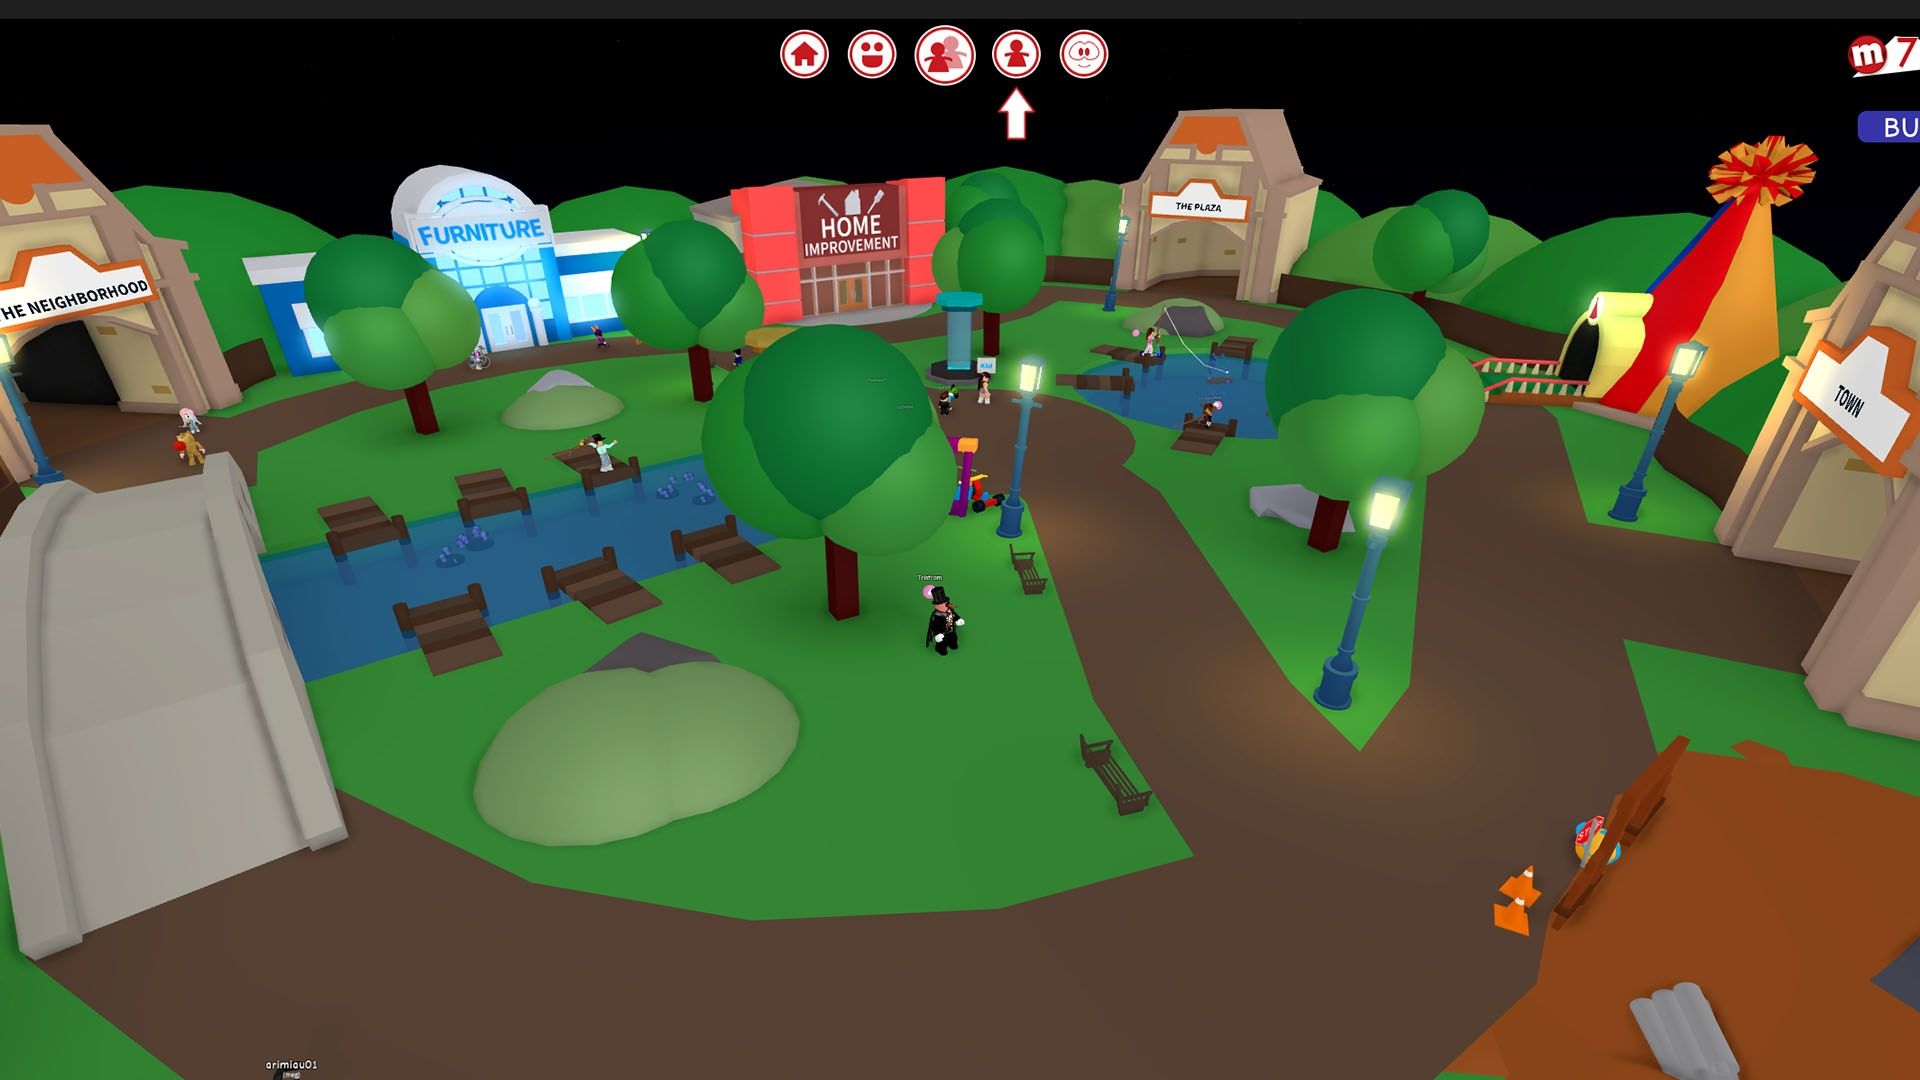 Website of the Roblox Game MeepCity. Editorial Stock Photo - Image